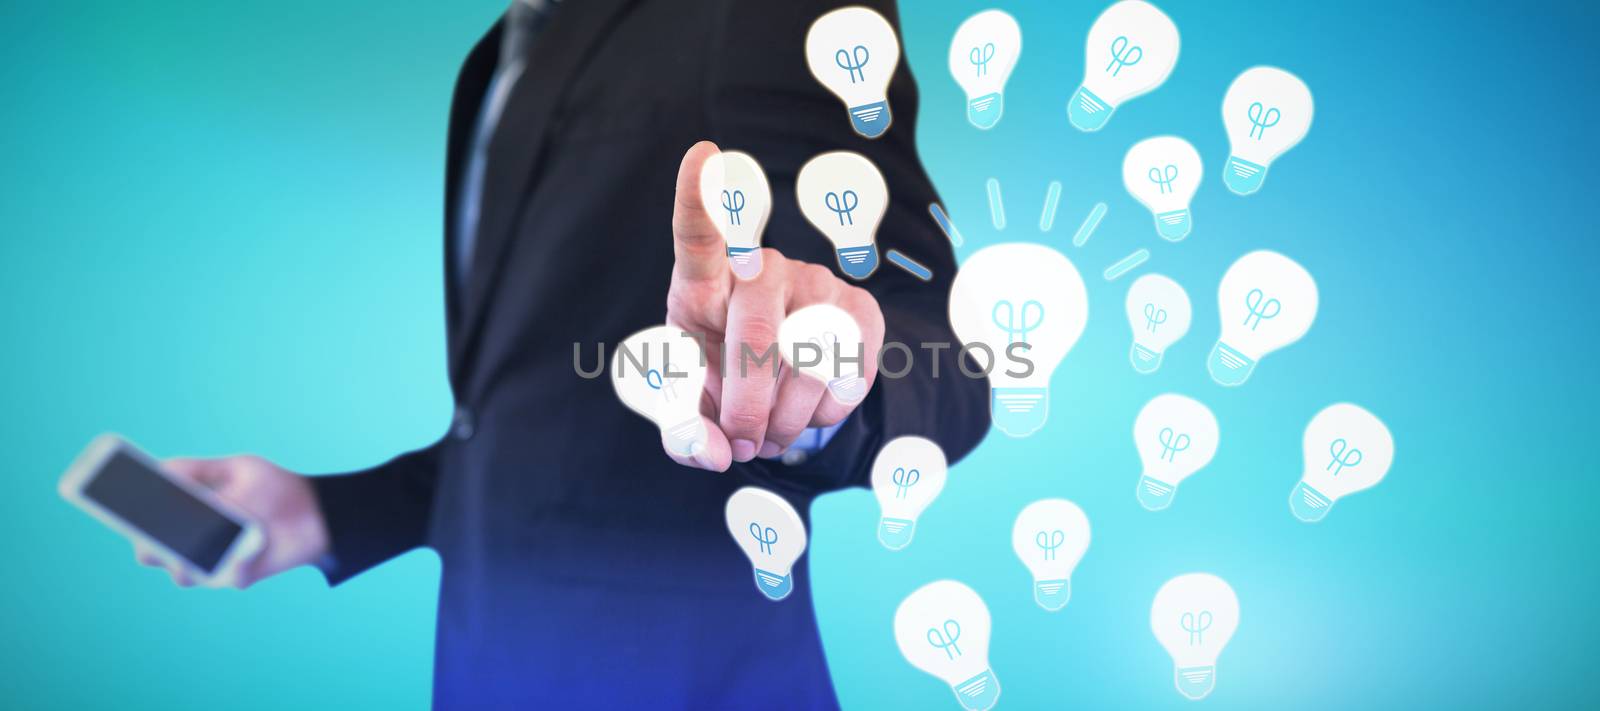 Mid section of businessman holding smartphone while using invisible interface against abstract blue background